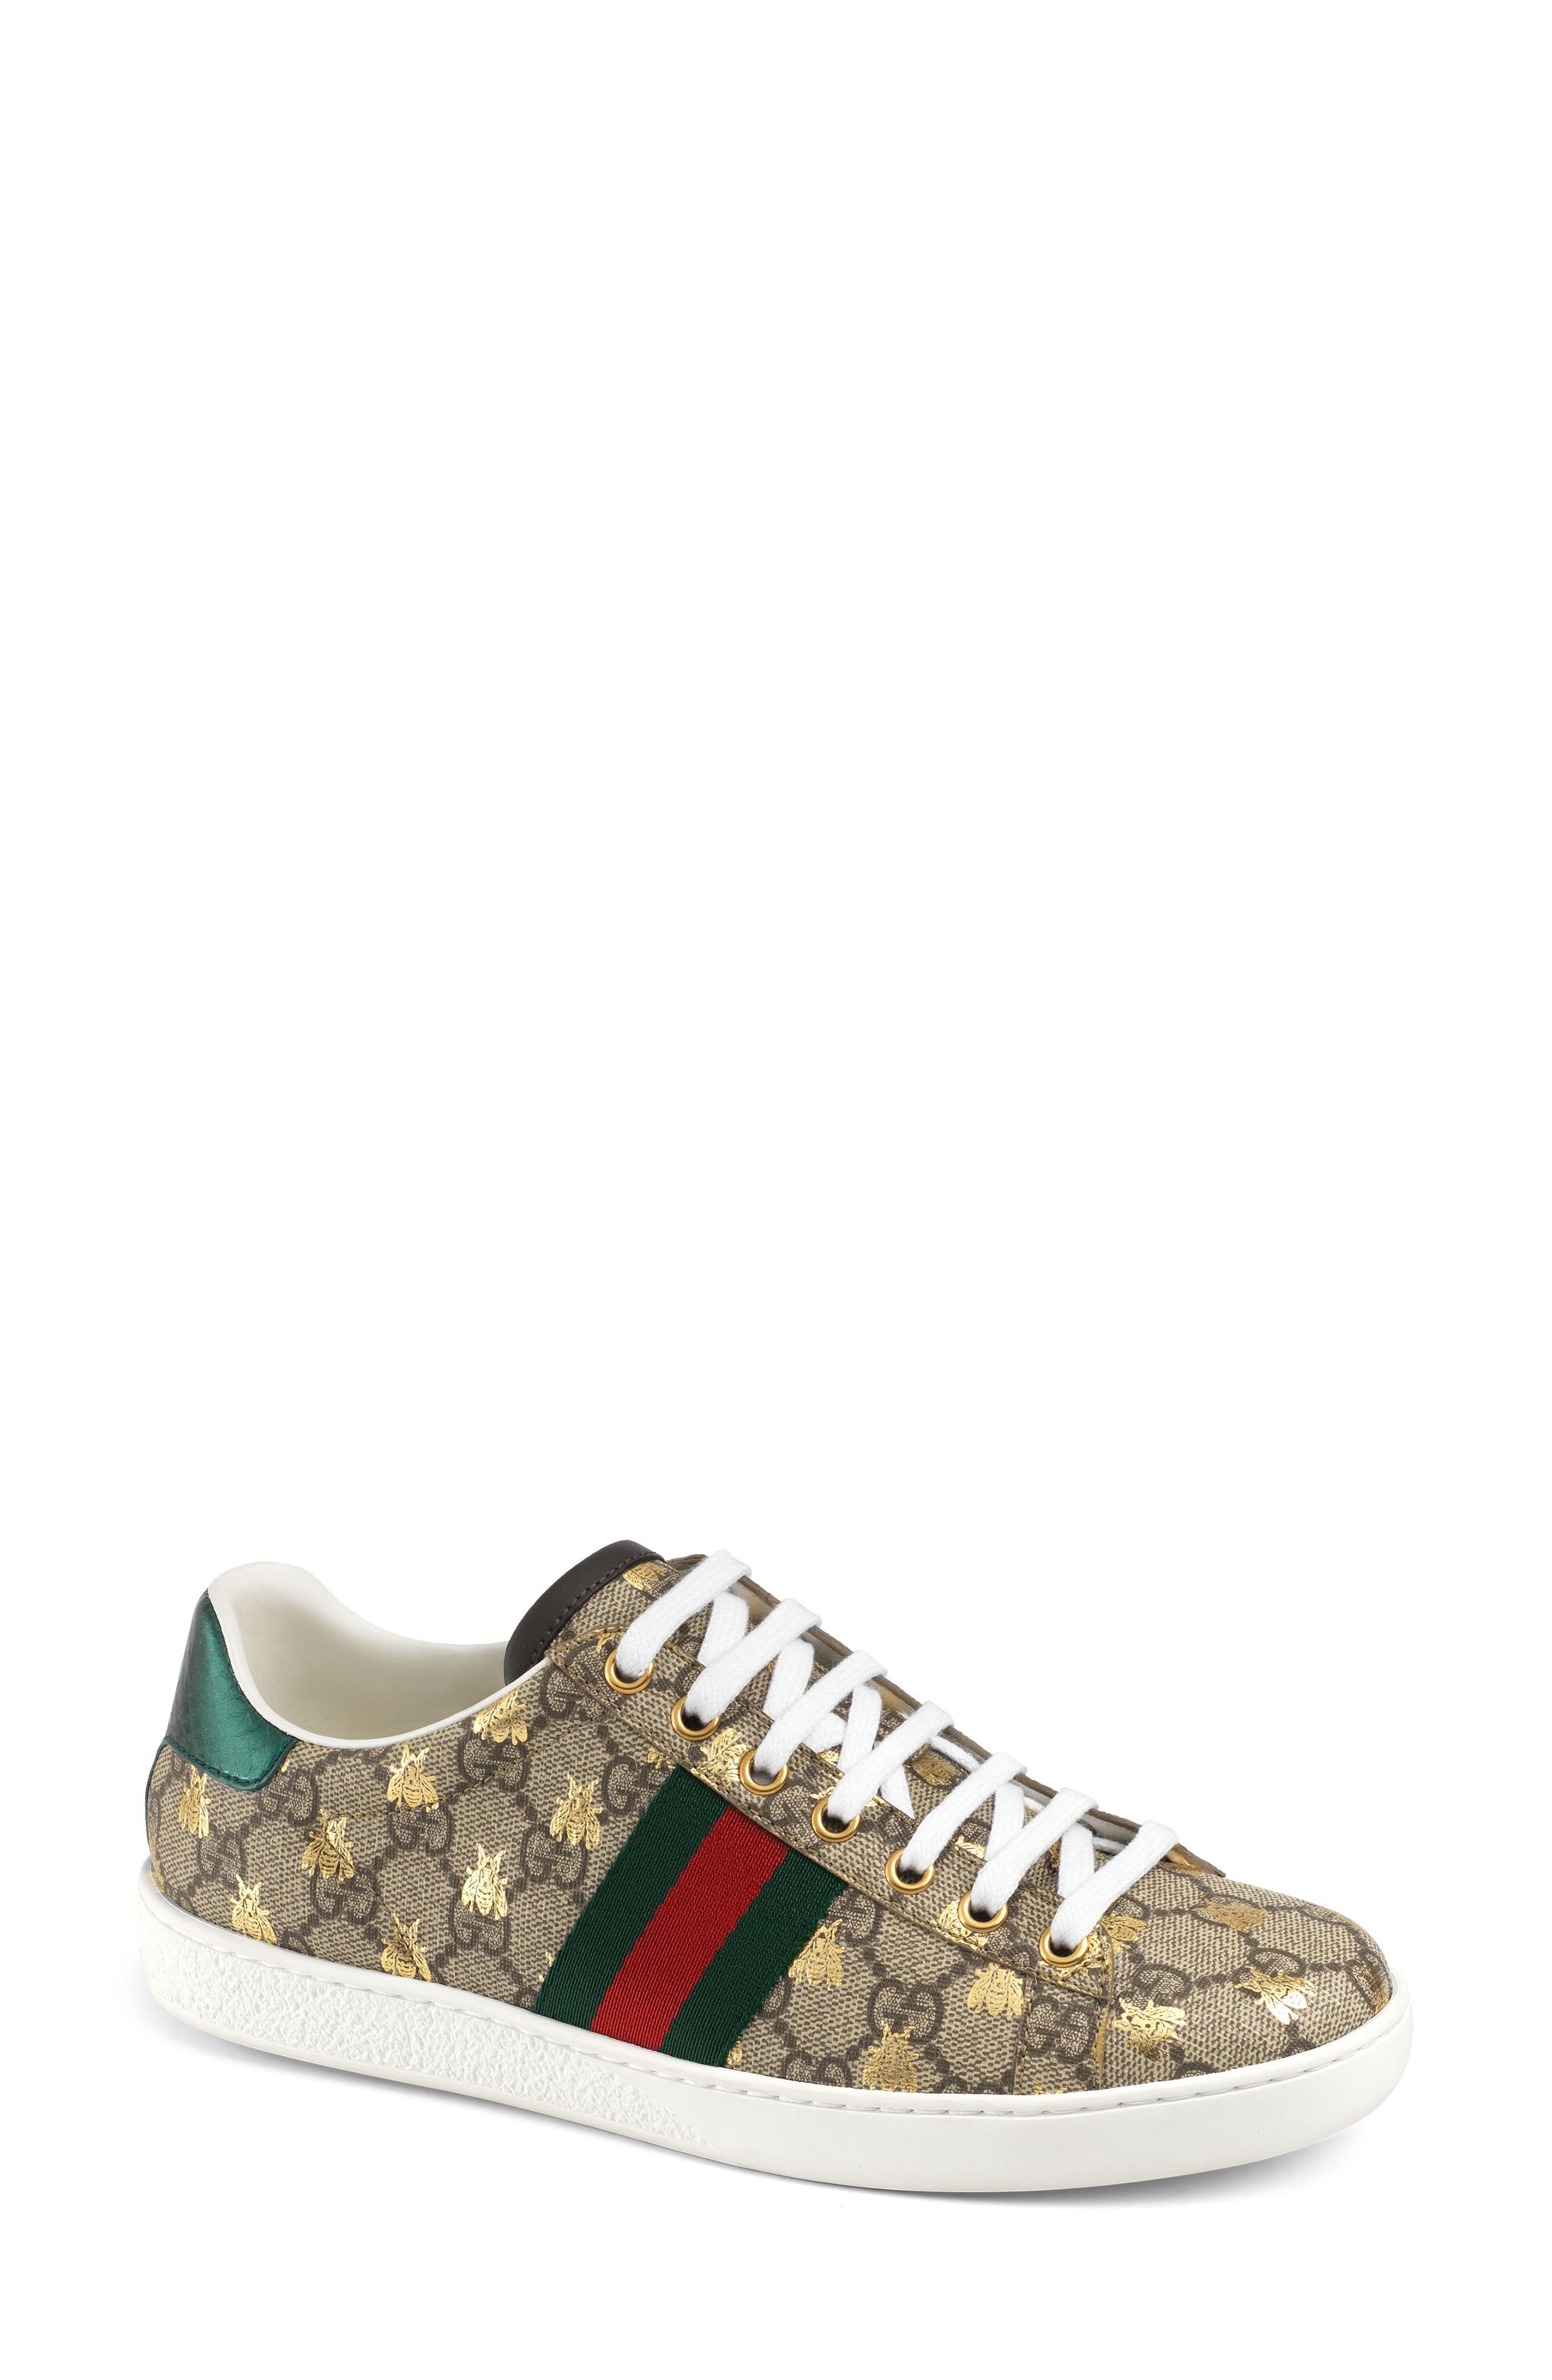 gucci shoes ladies price